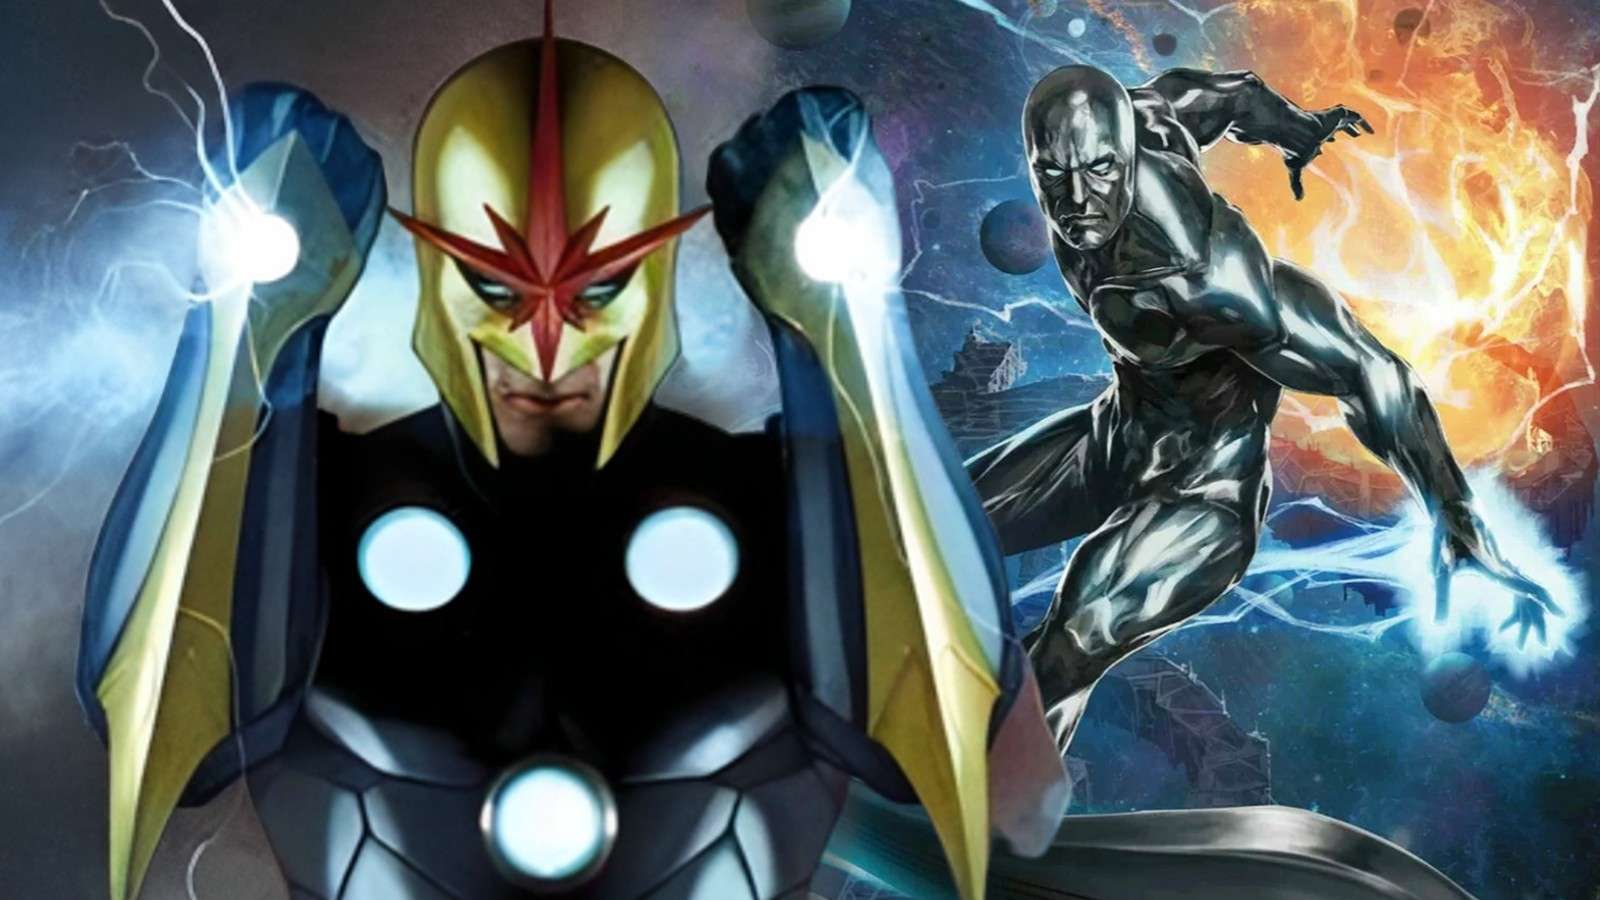 Nova and Silver Surfer in the Marvel Comics